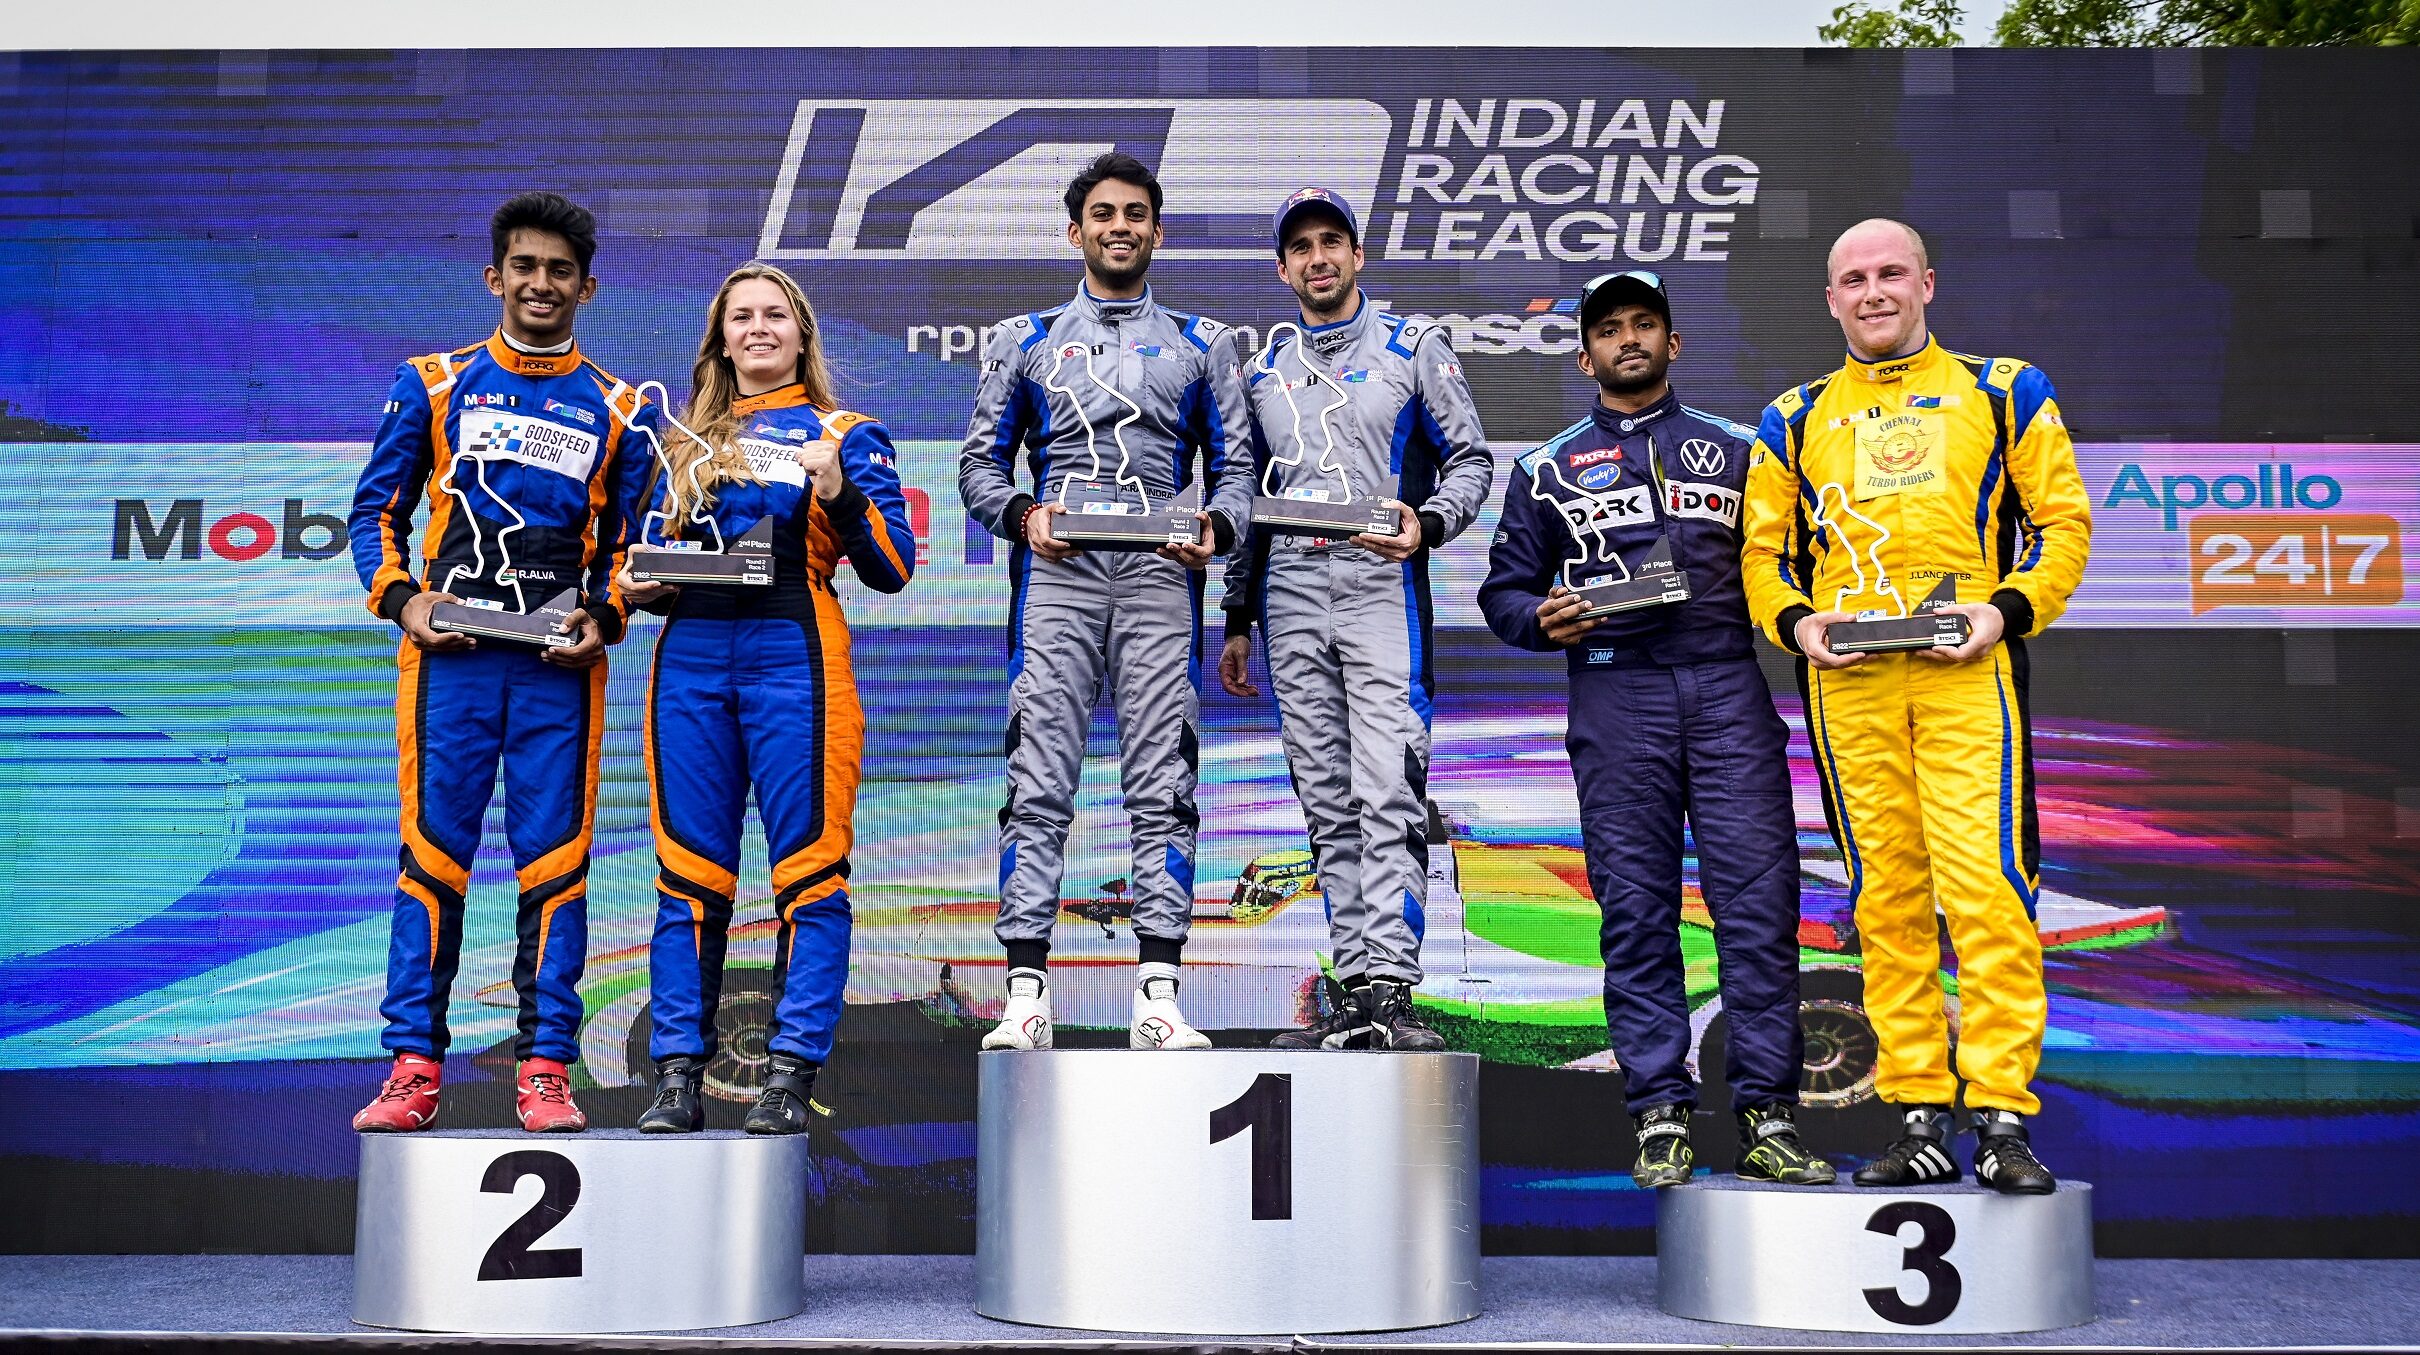 (from left to right) - Godspeed Kochi, Hyderabad Blackbirds and Chennai Turbo Riders at the podium after the sprint race on 27 November at the MIC.